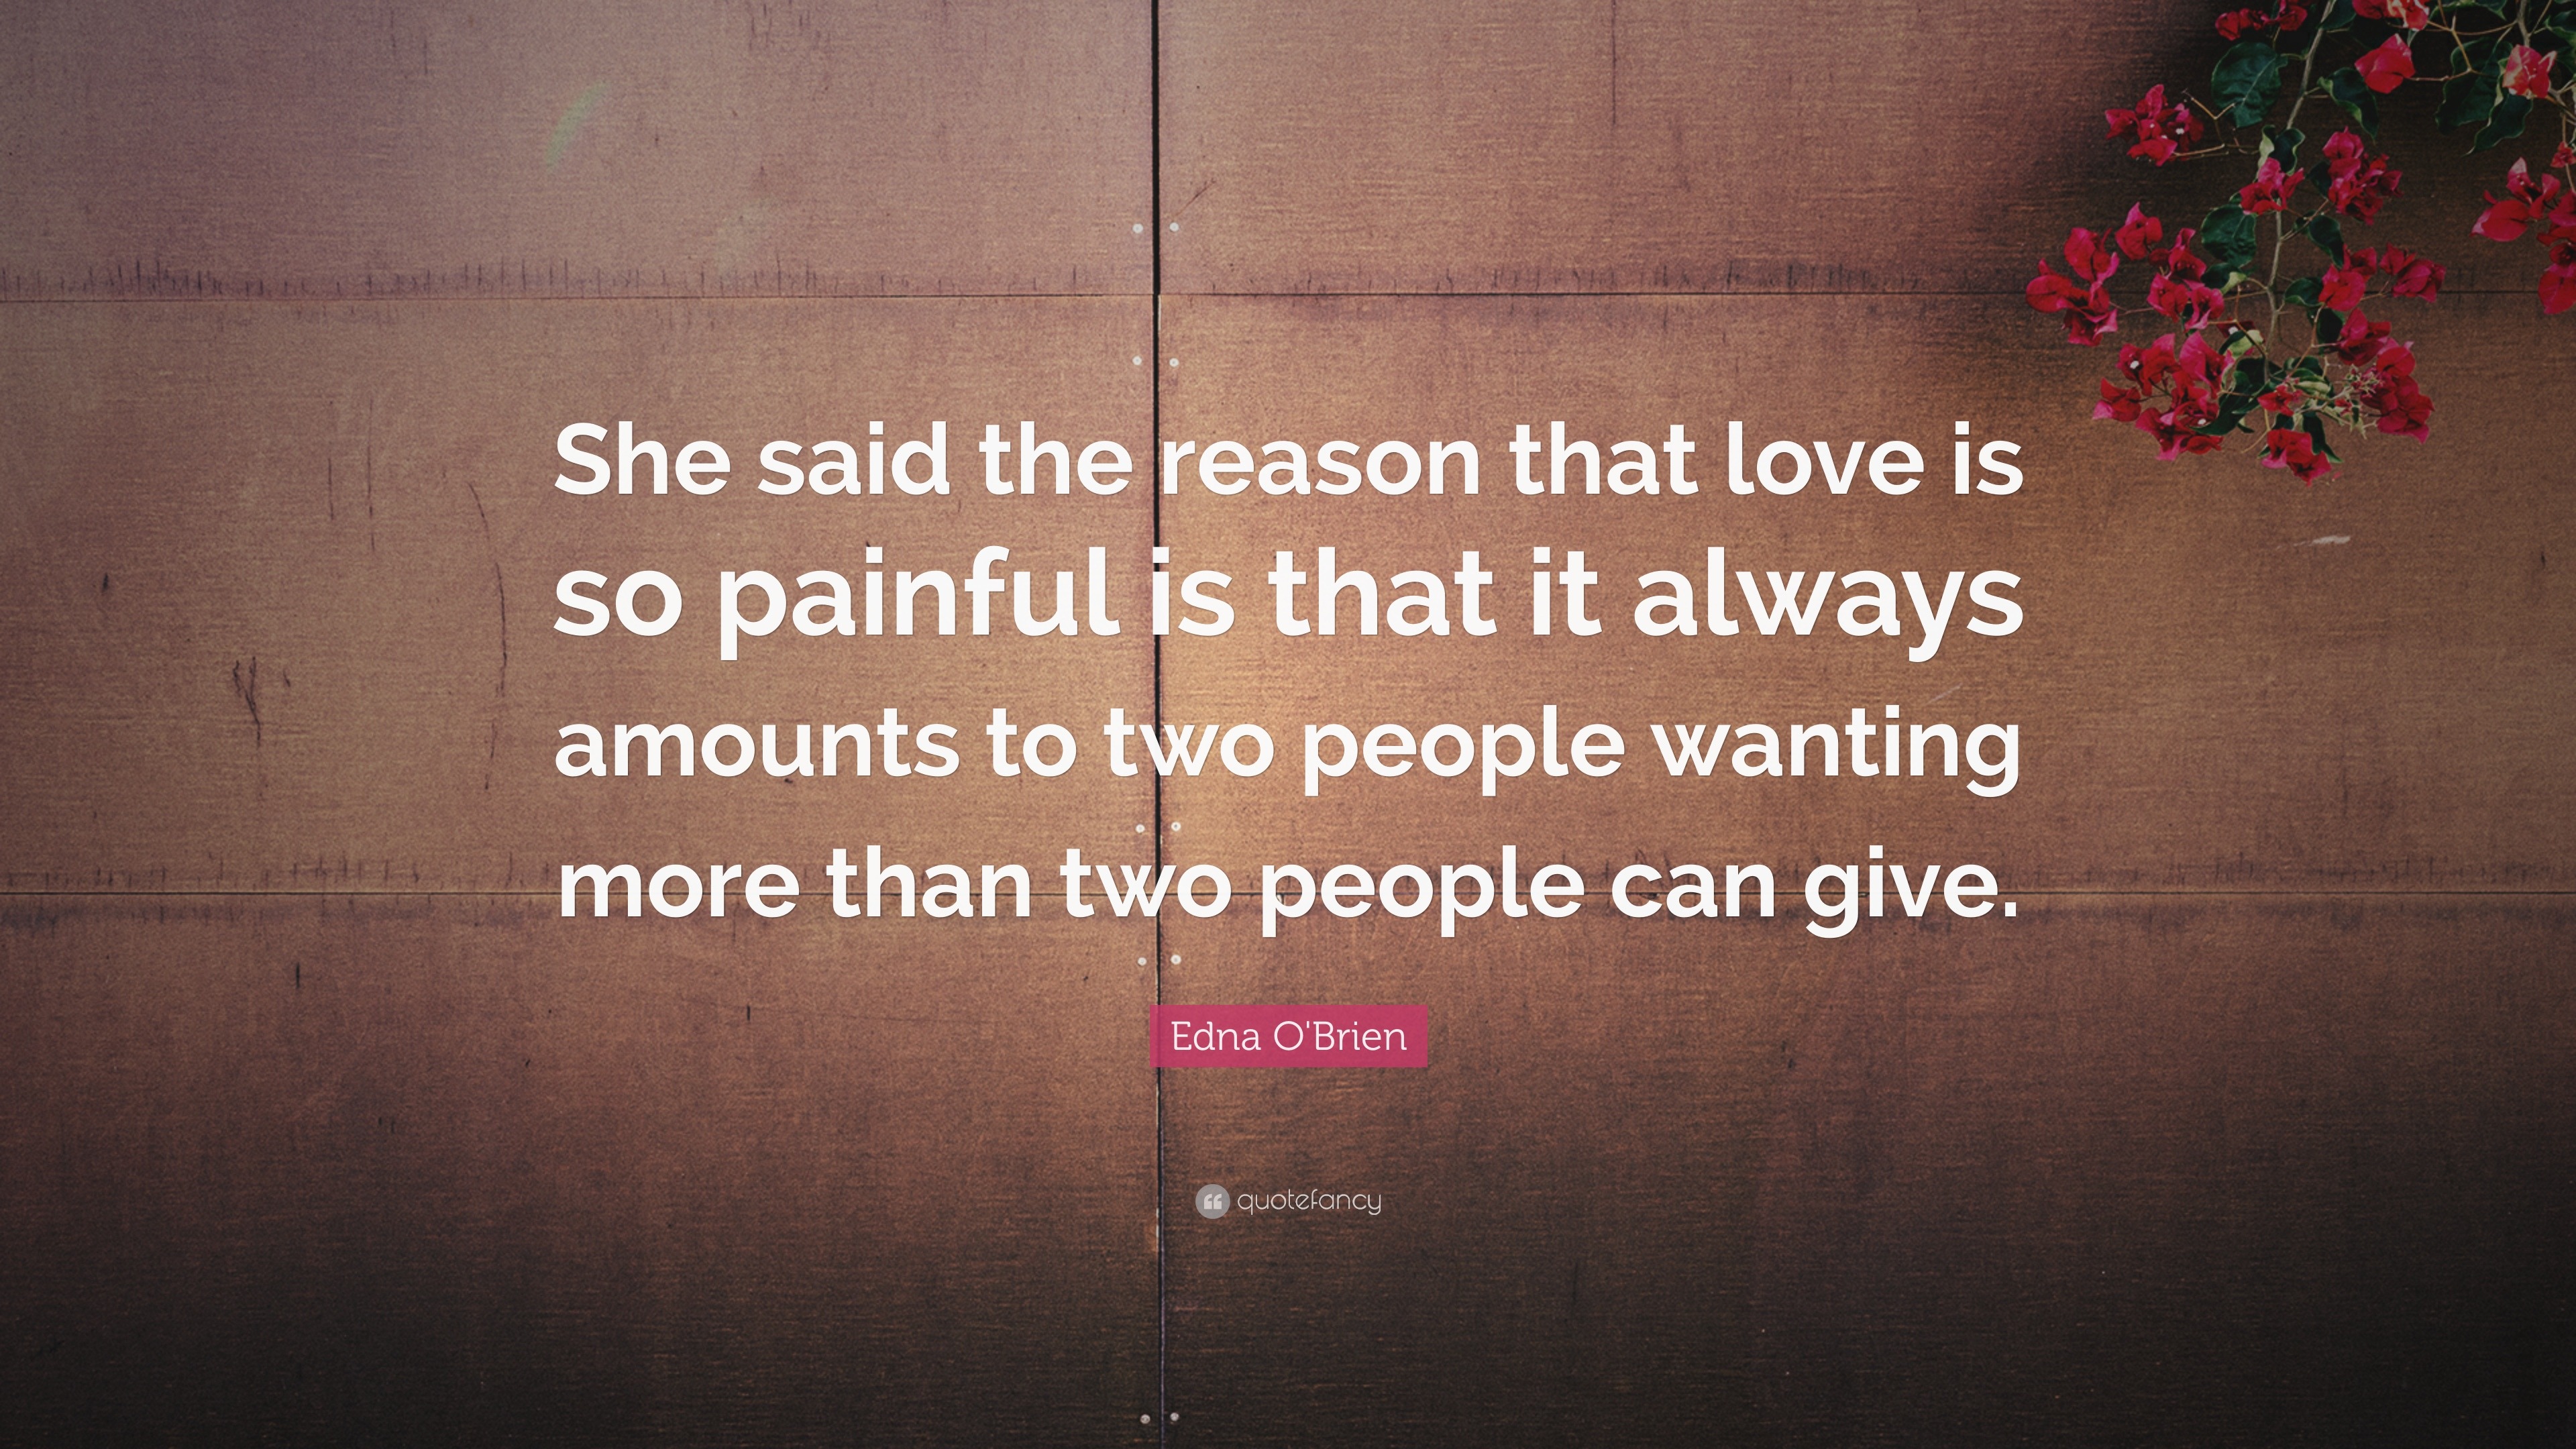 Edna O'Brien Quote: “She said the reason that love is so painful is ...